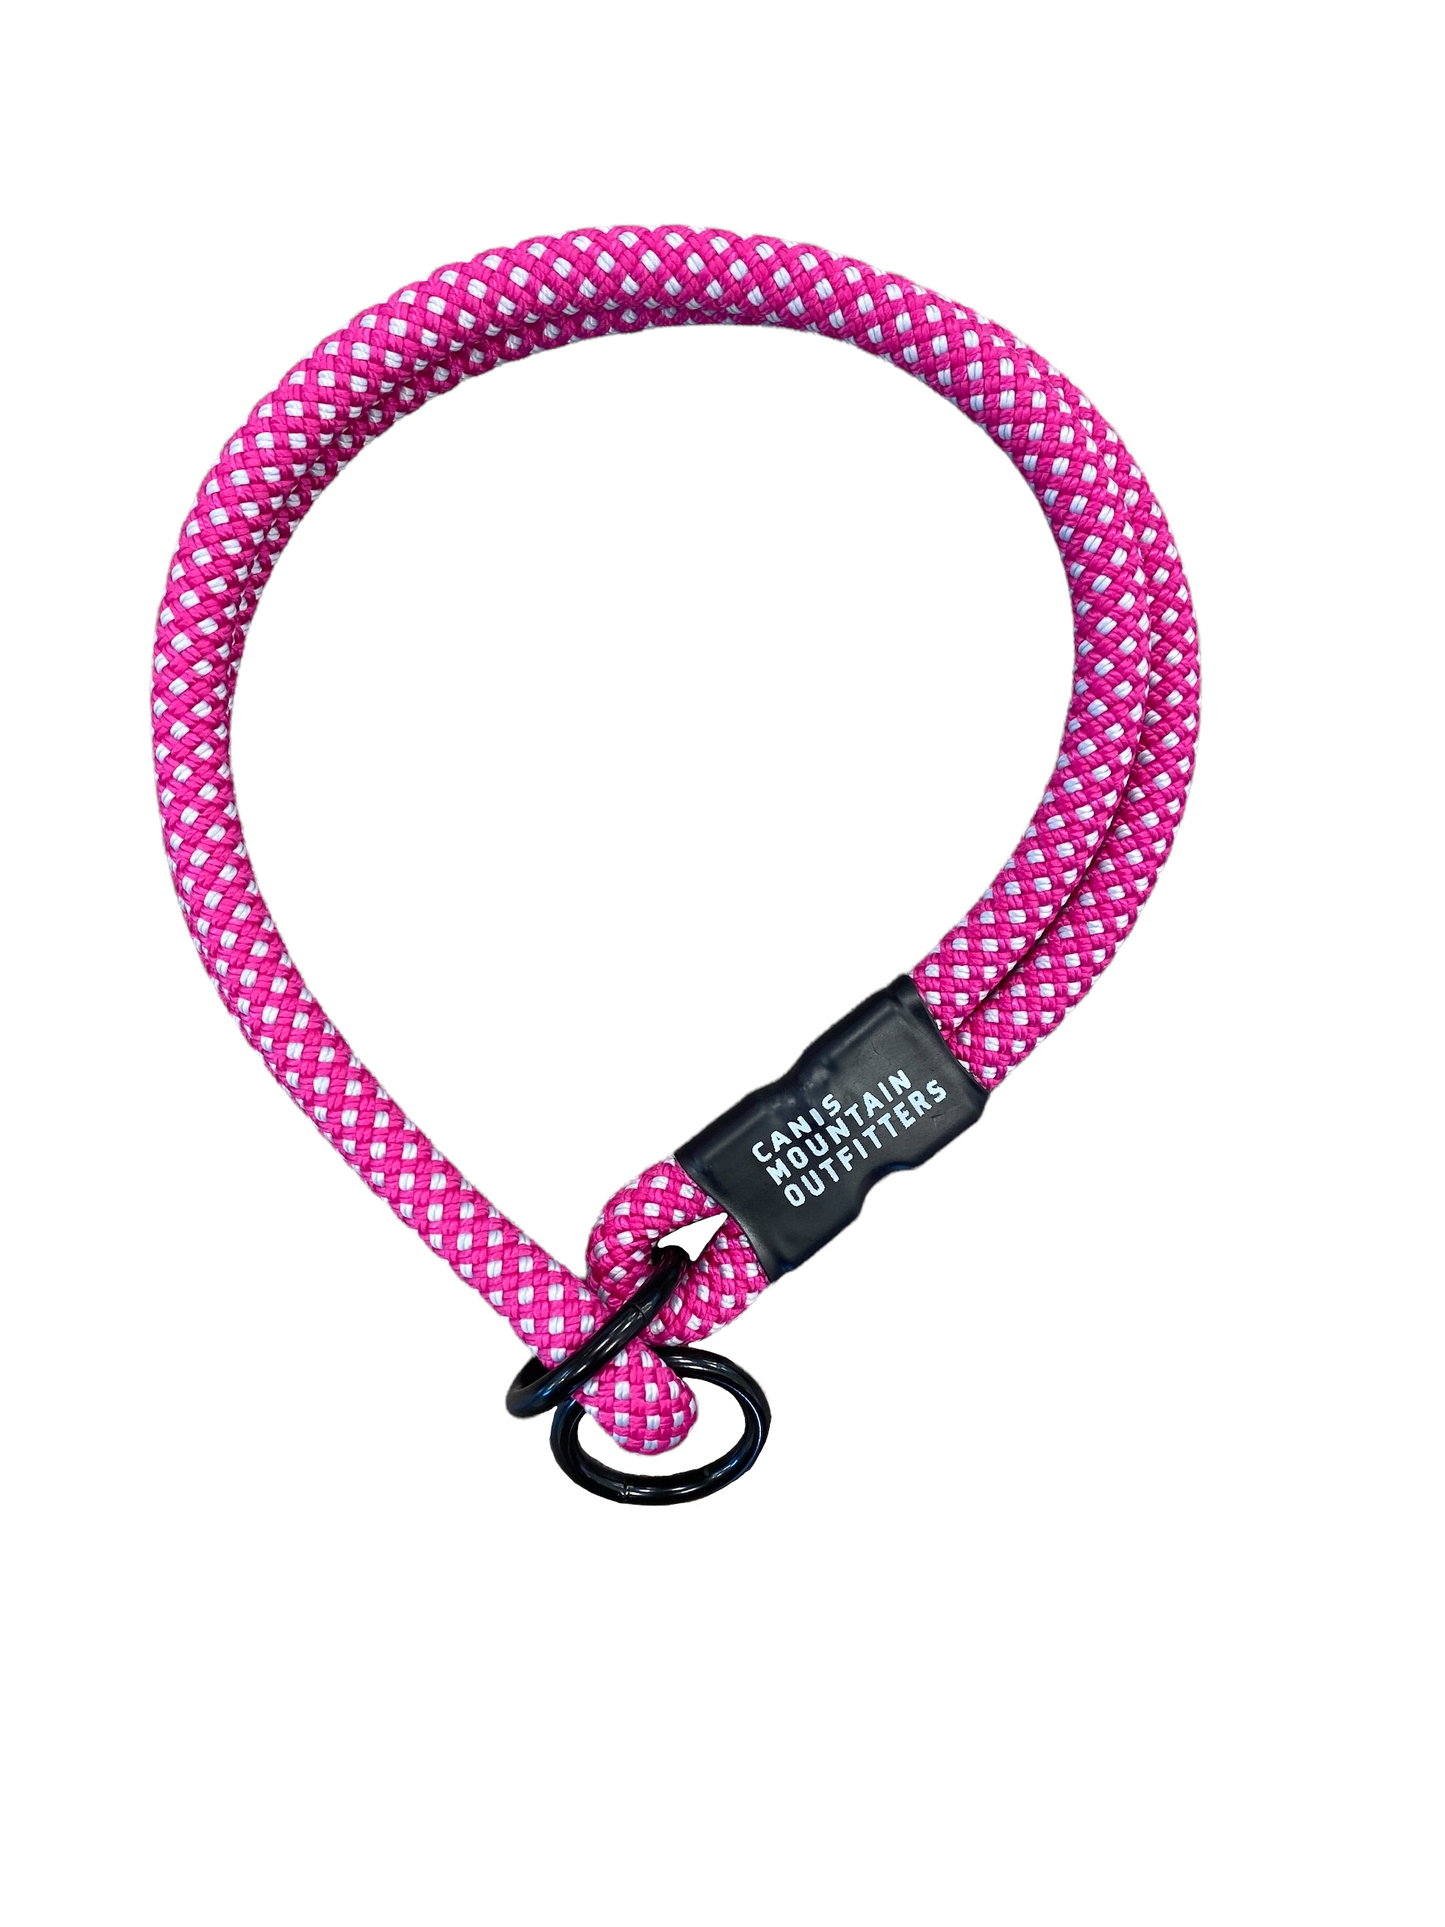 Canis Slip Collar - RS - Limited - Pink White - 10mm